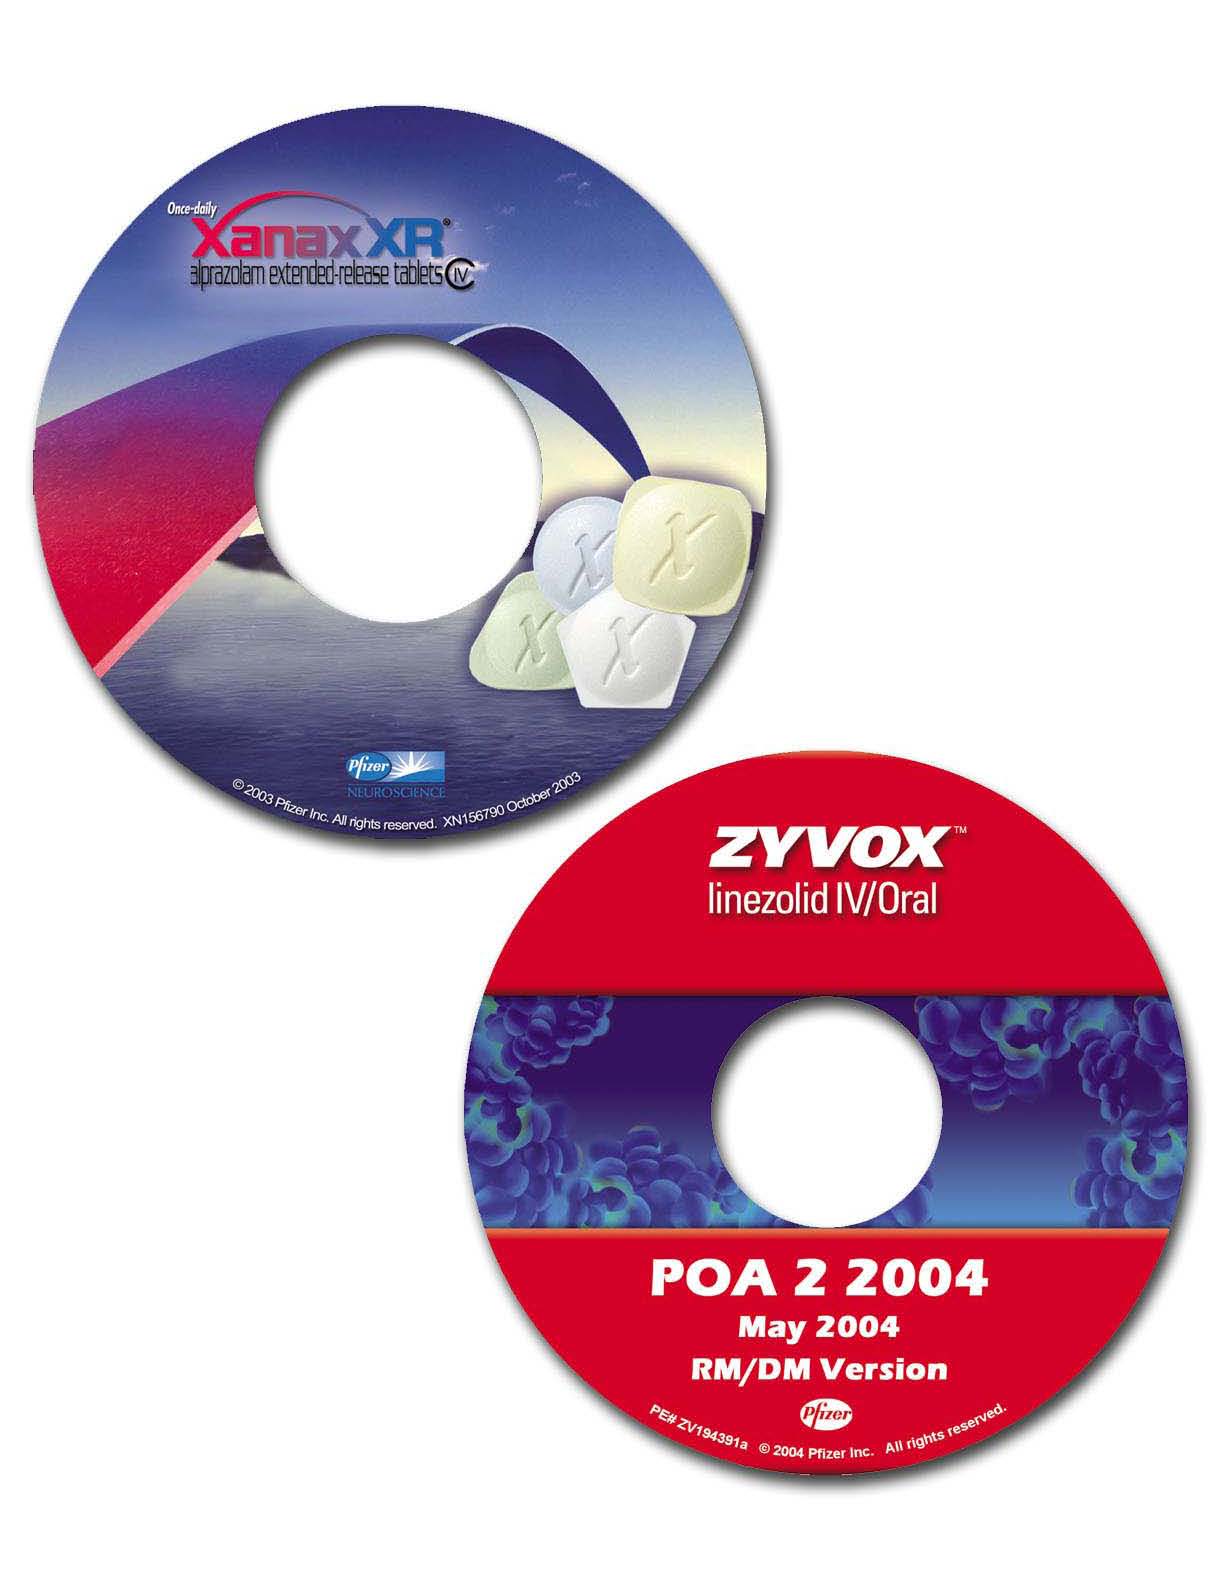 DVD Labels for Zyvox & Xanax